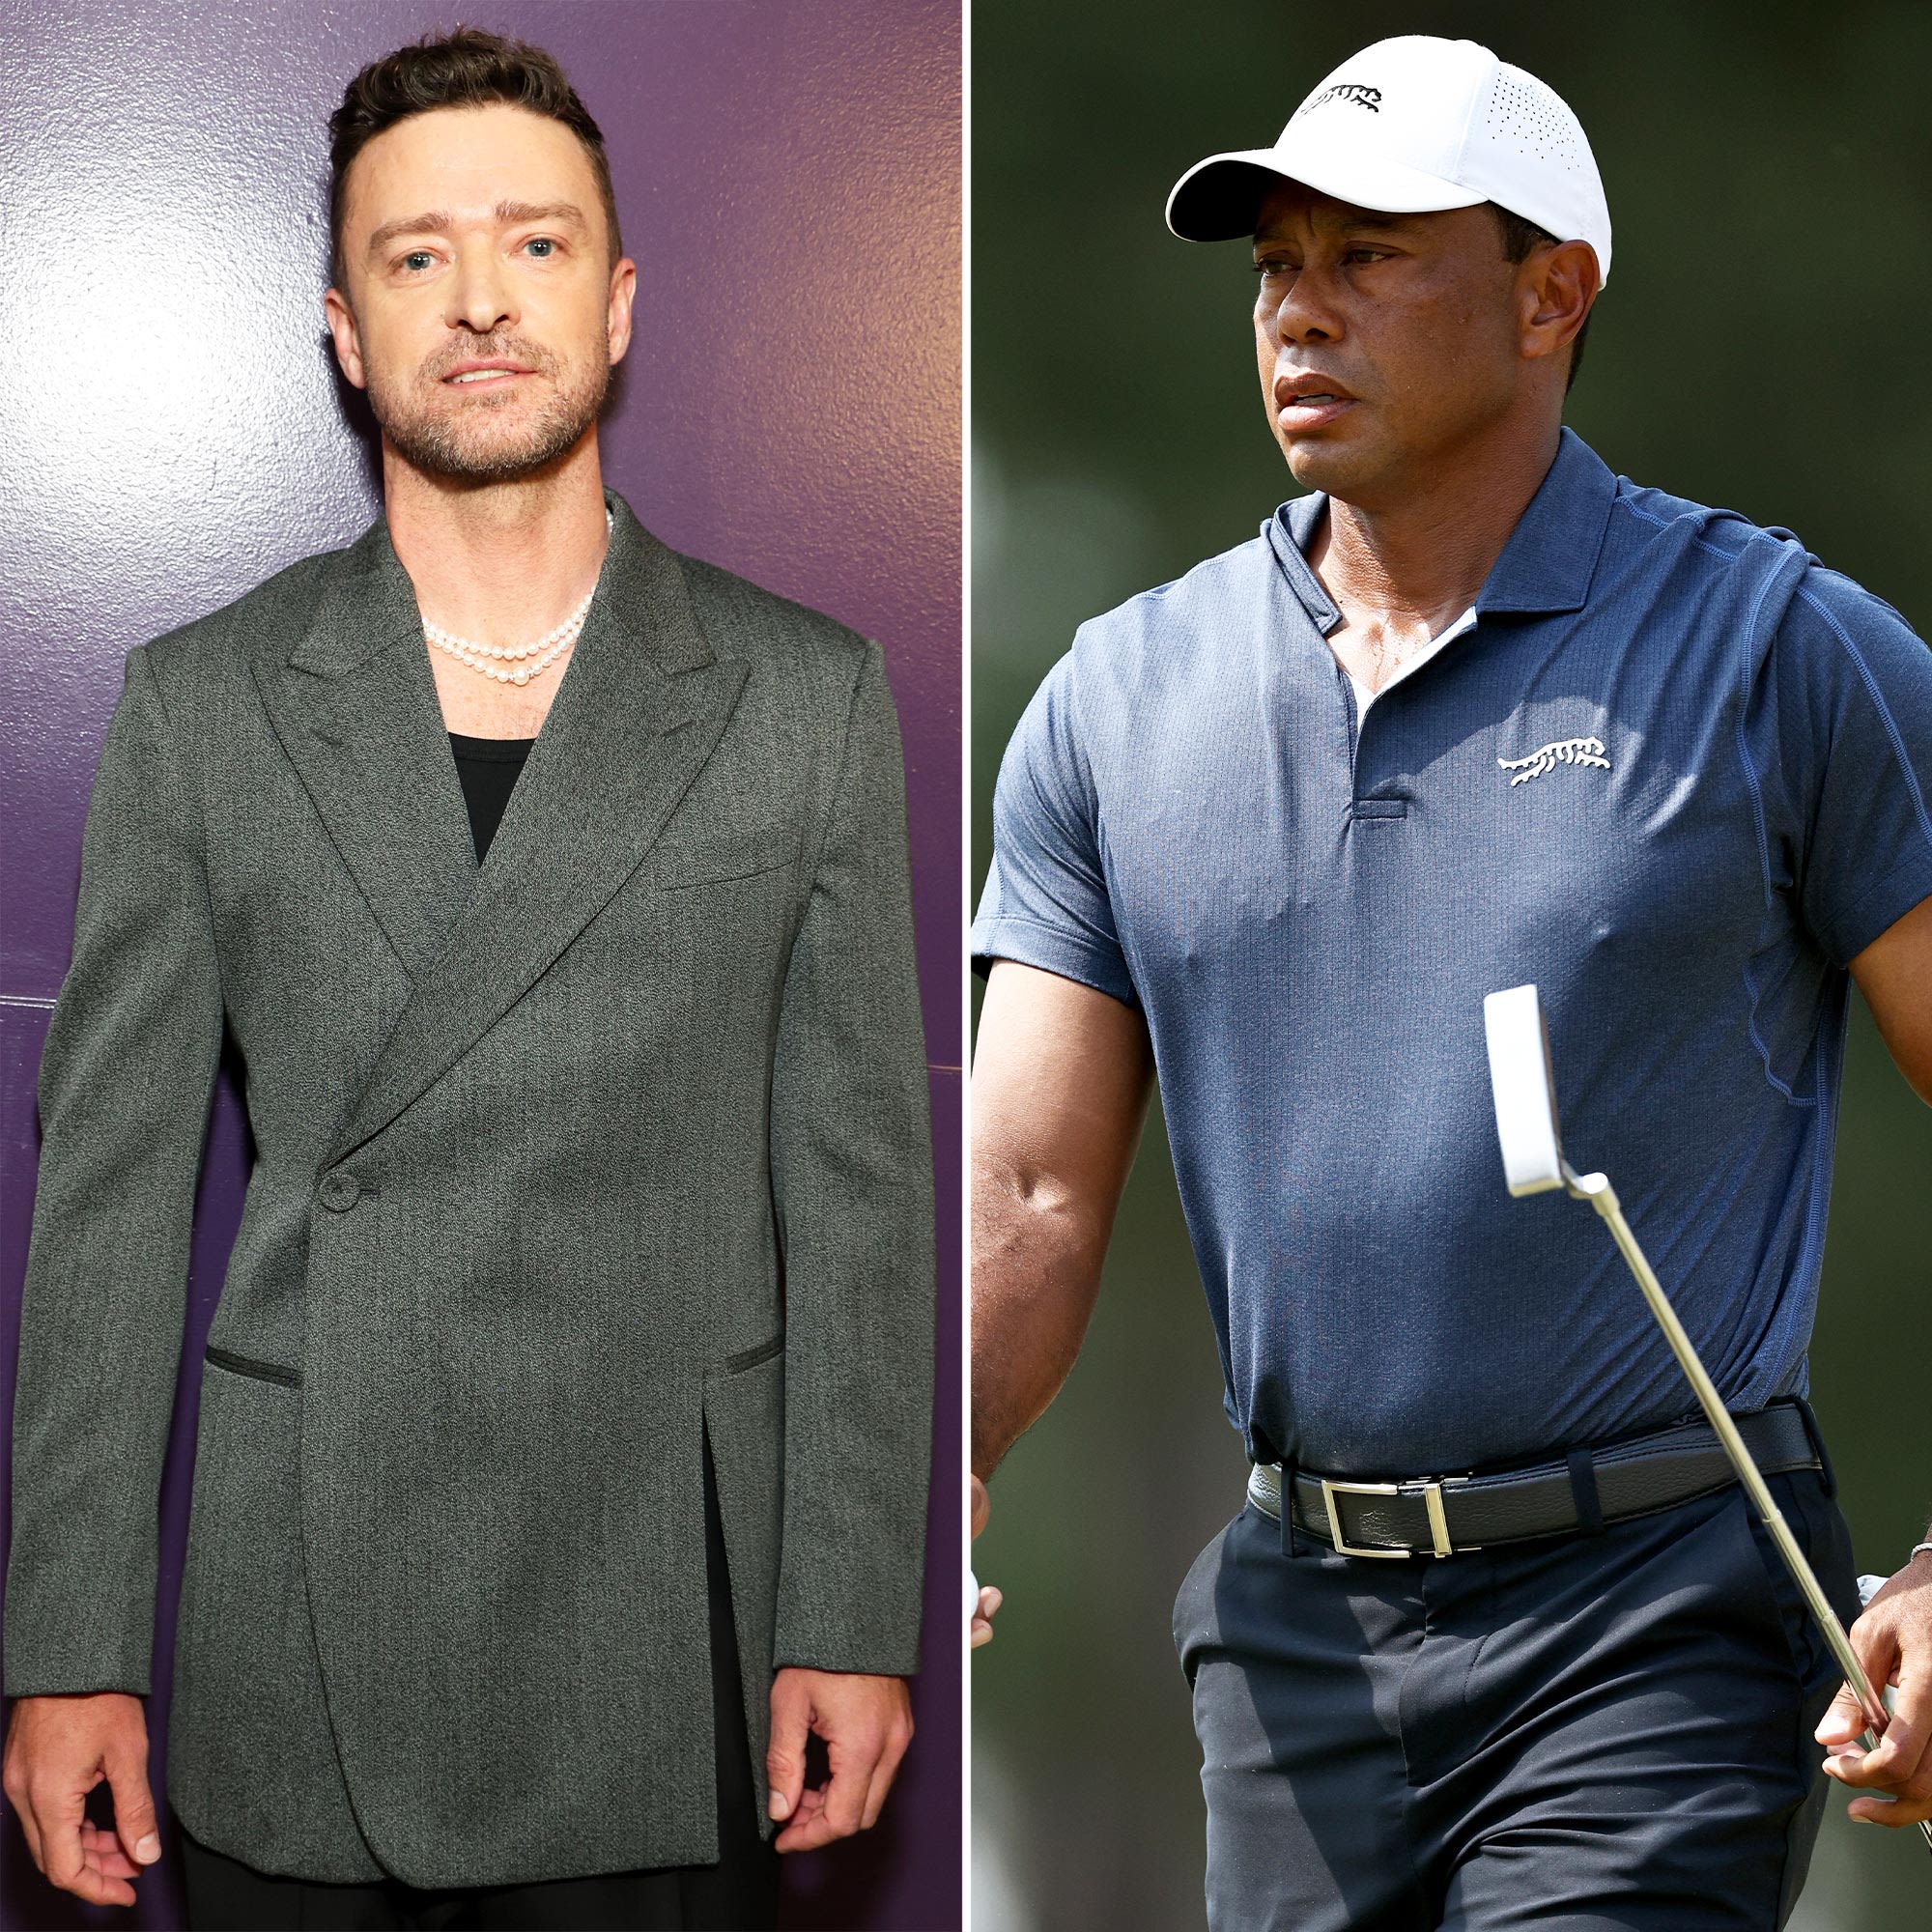 Justin Timberlake and Tiger Woods to Open Sports Bar T-Squared Social in Scotland: ‘Stay Tuned’